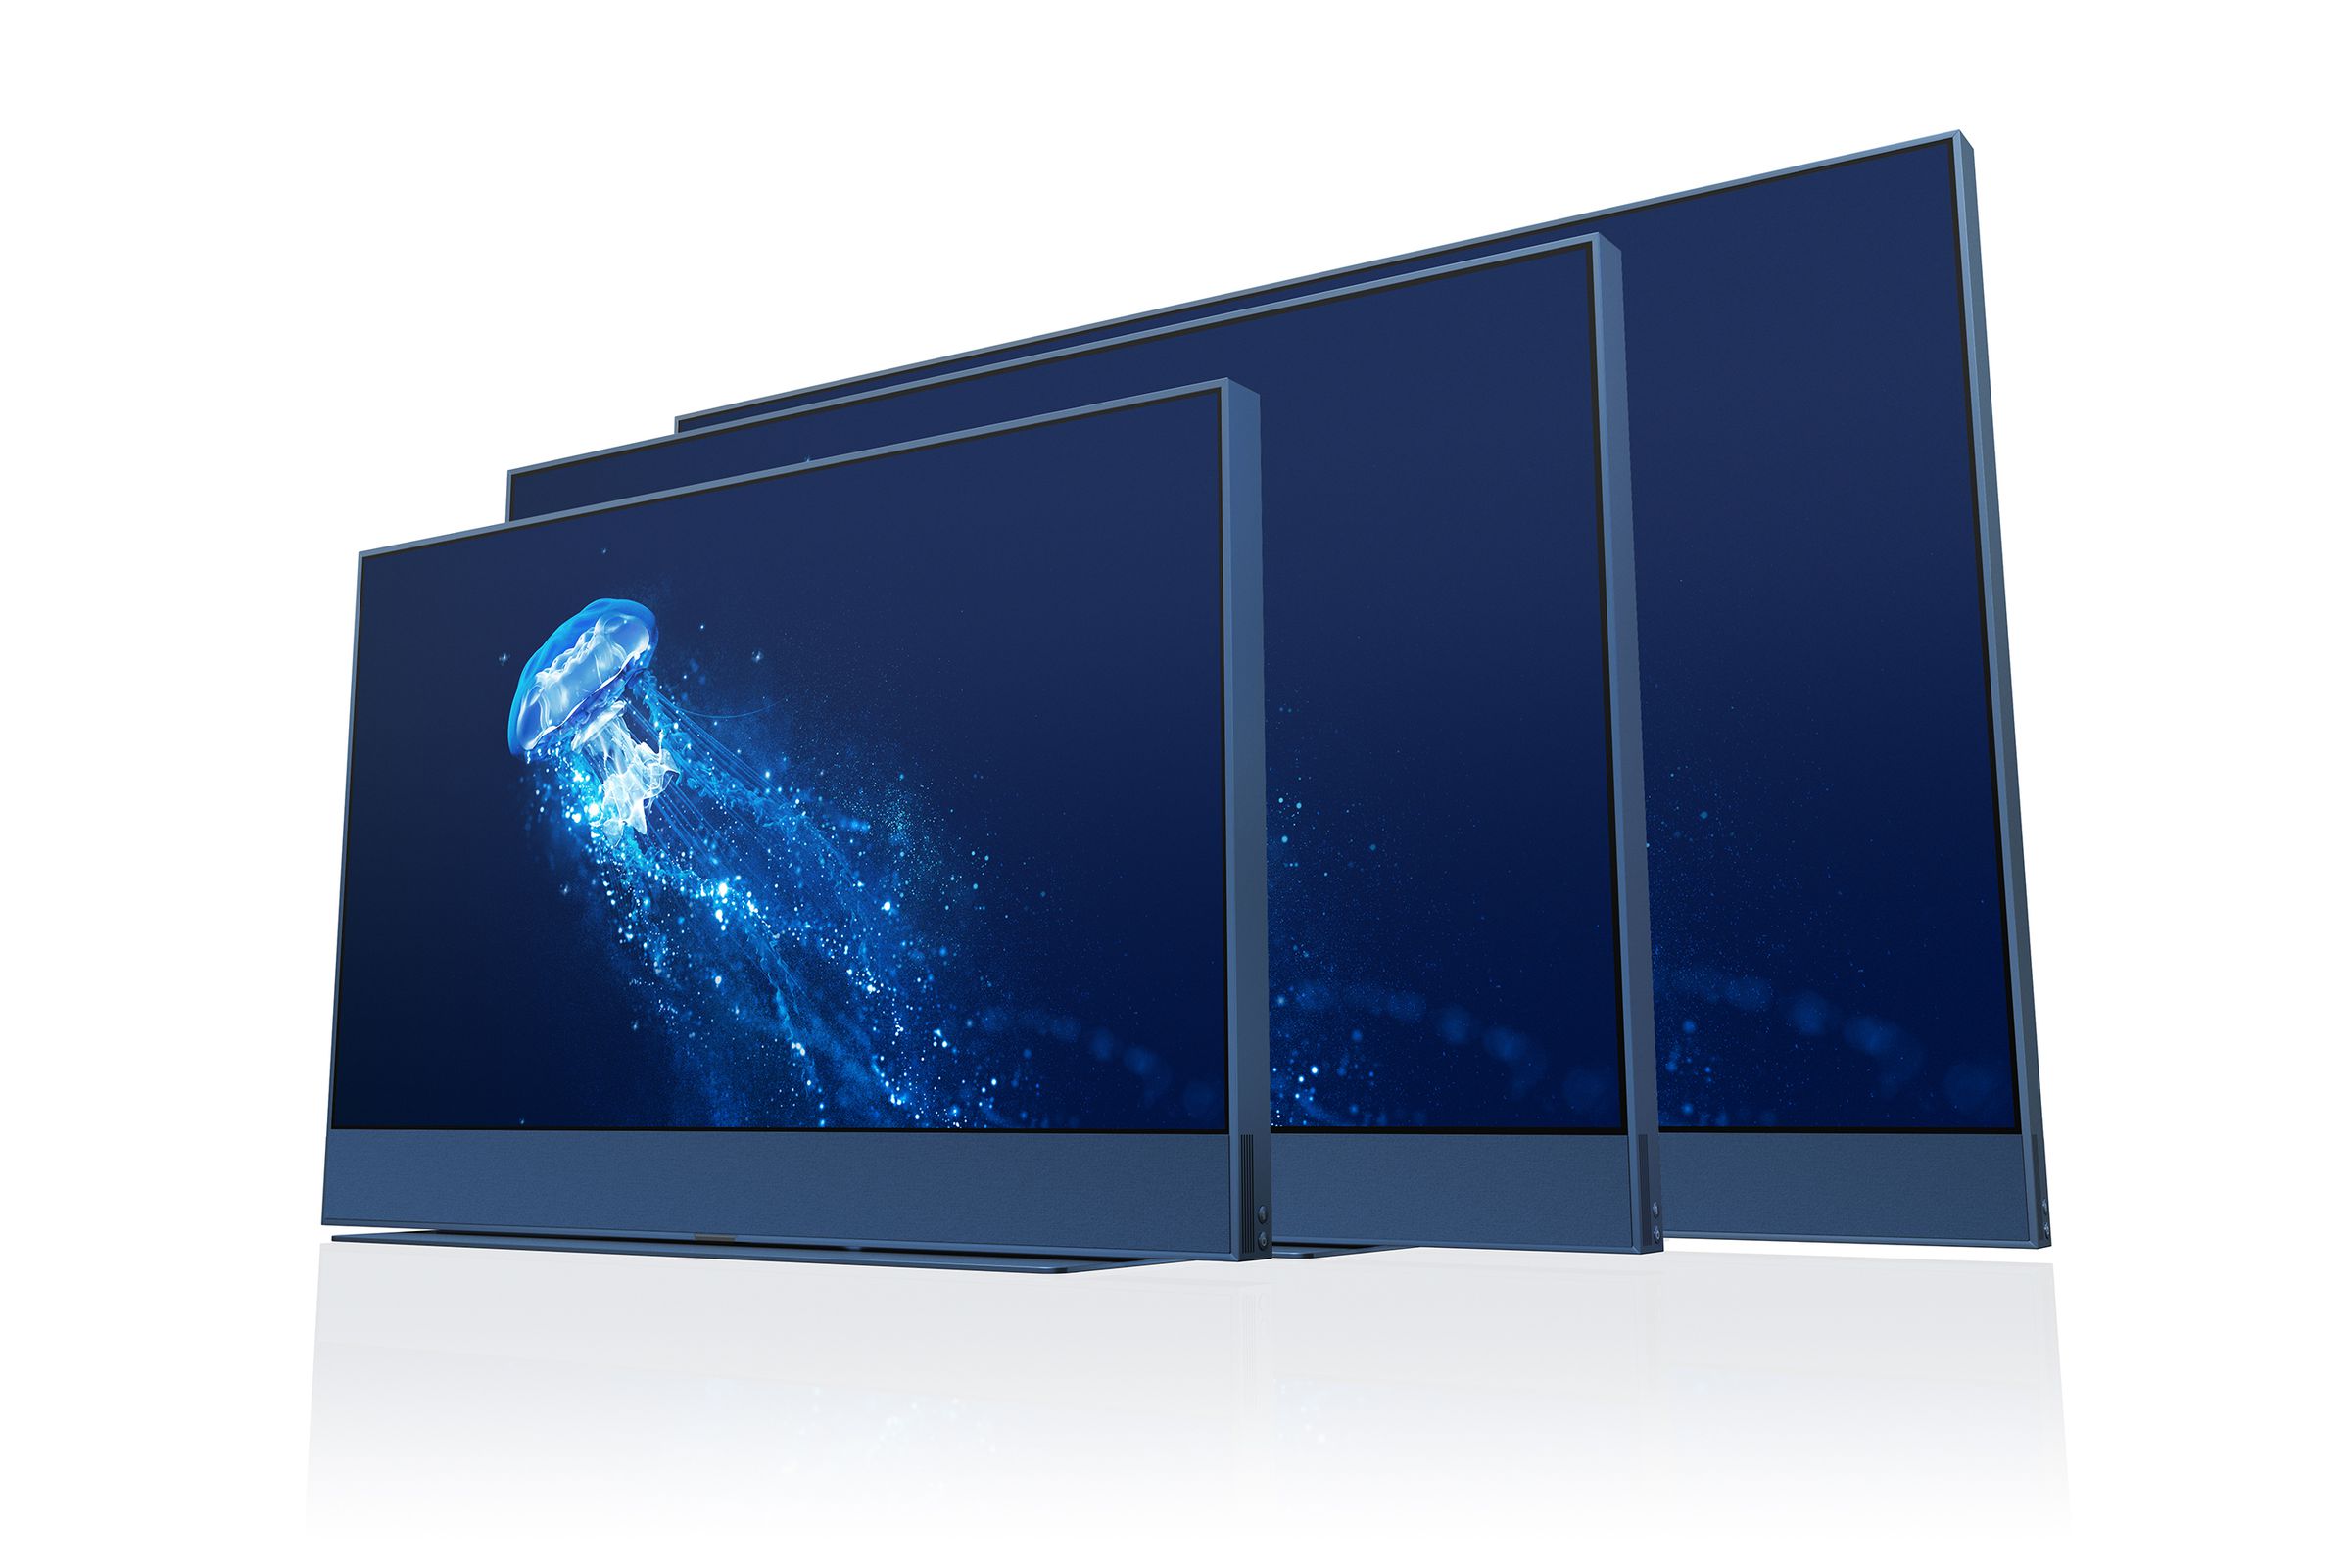 Sky Glass TVs come in three sizes.